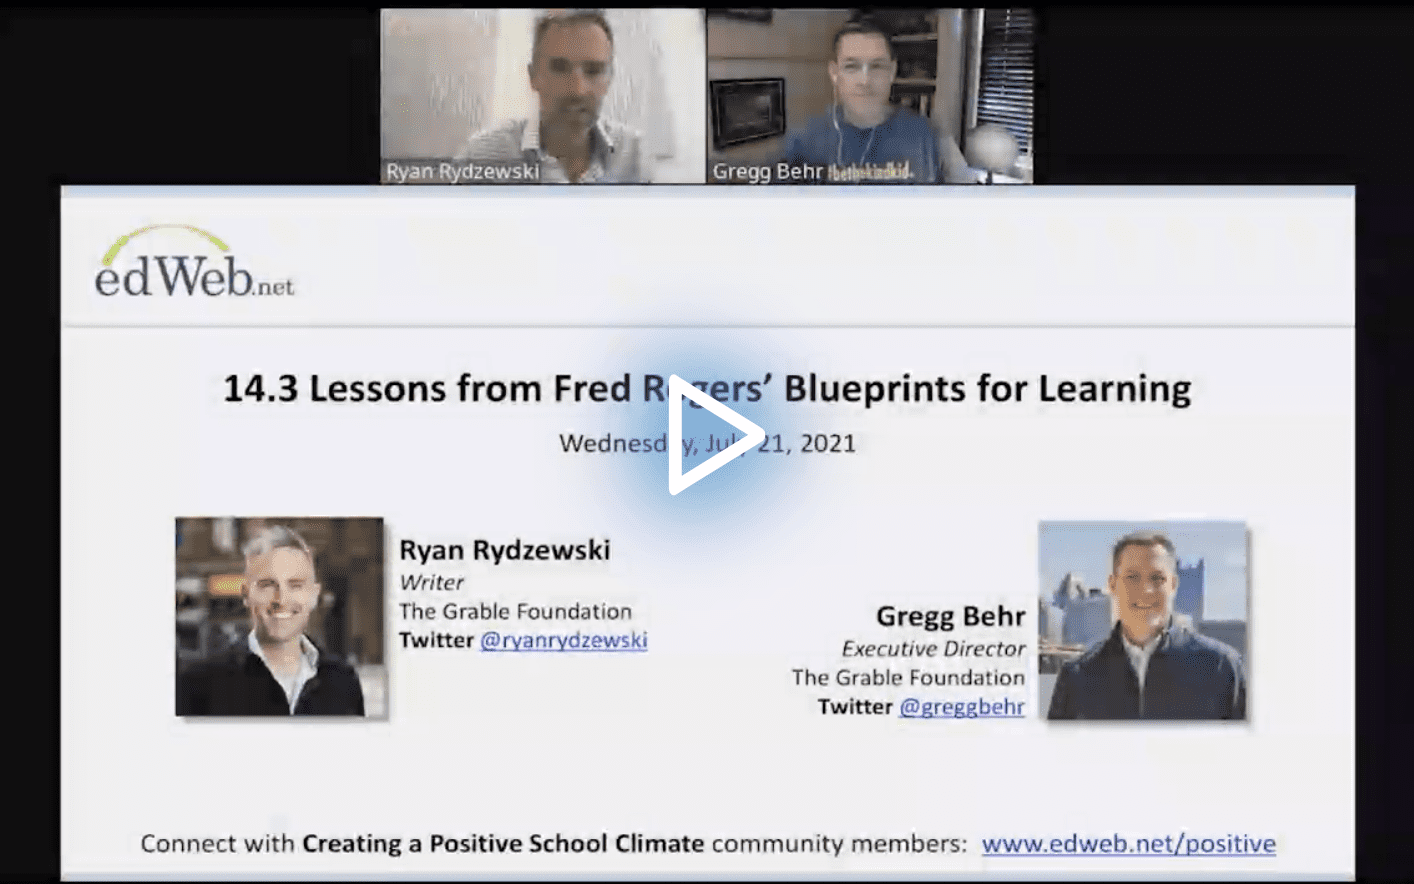 14.3 Lessons from Fred Rogers’ Blueprints for Learning edWebinar recording link